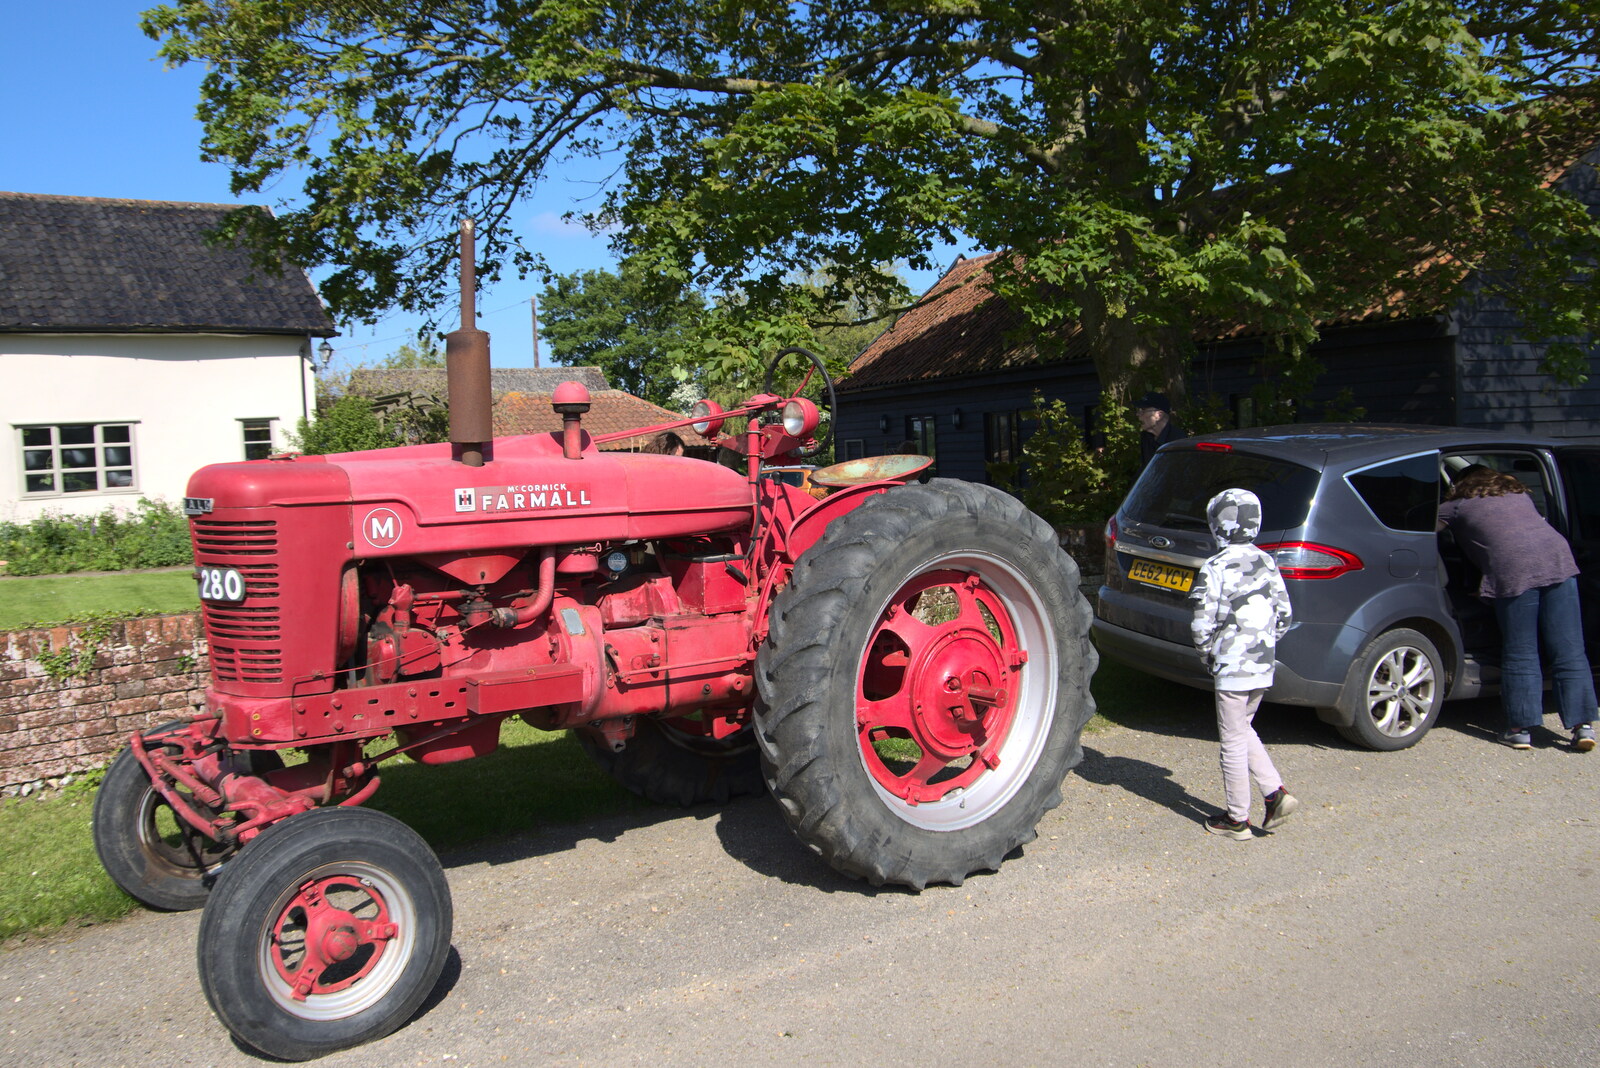 Clive's Farmall tractor from A Day at the Beach with Sis, Southwold, Suffolk - 31st May 2021